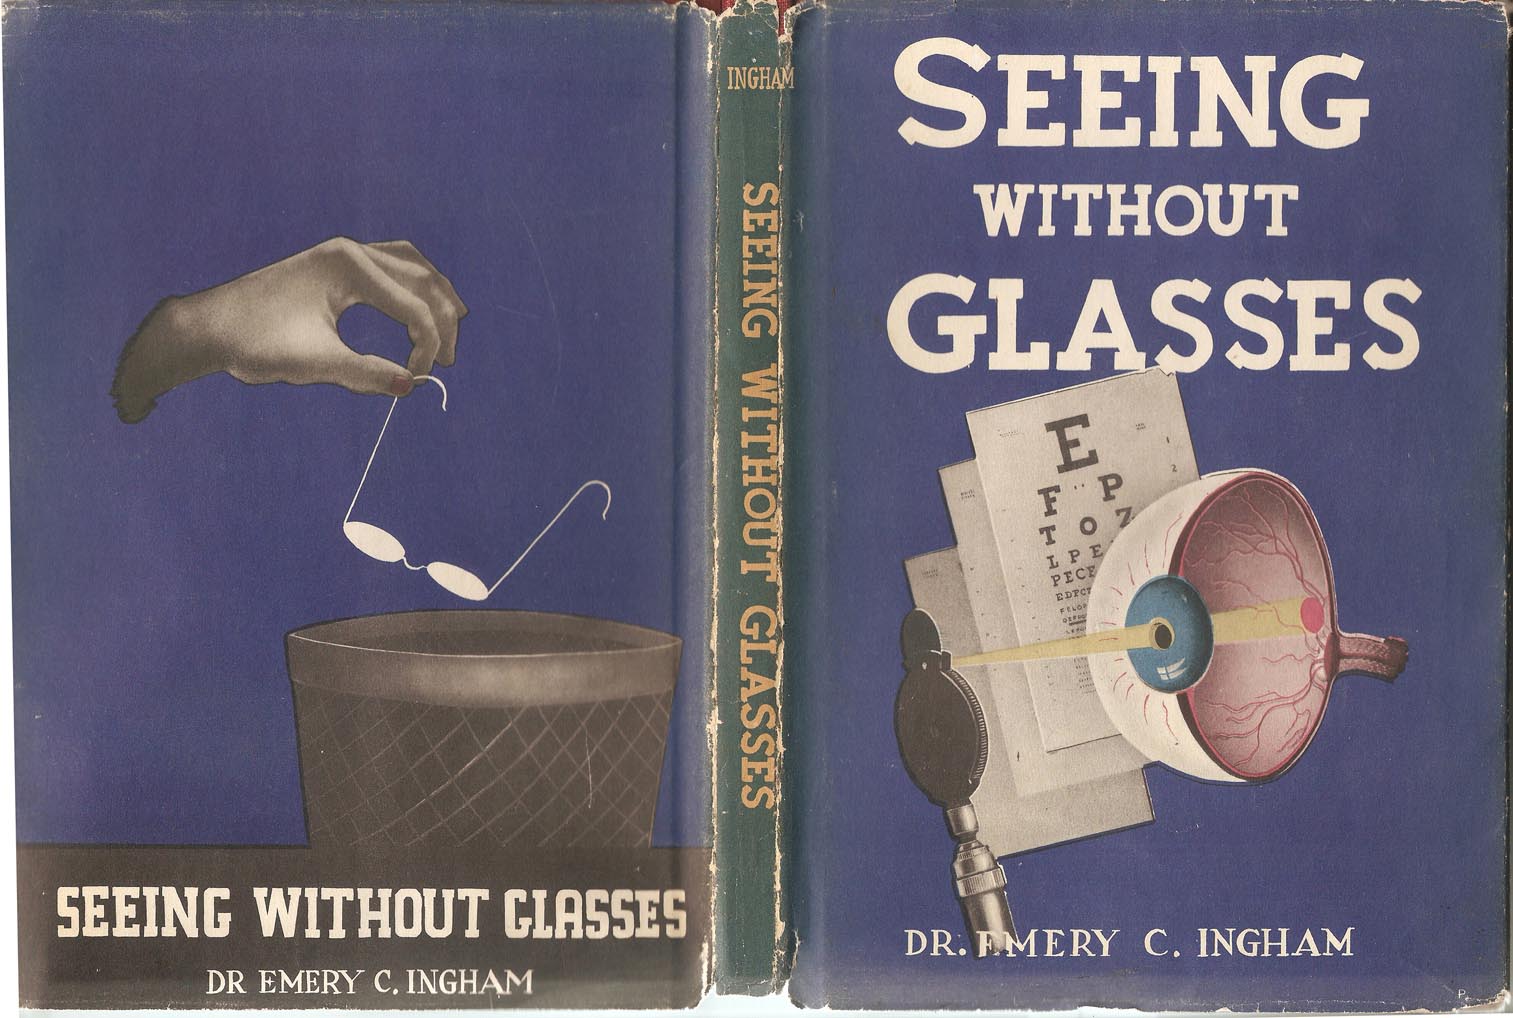 Seeing Without Glasses by Dr. Emery C. Ingham